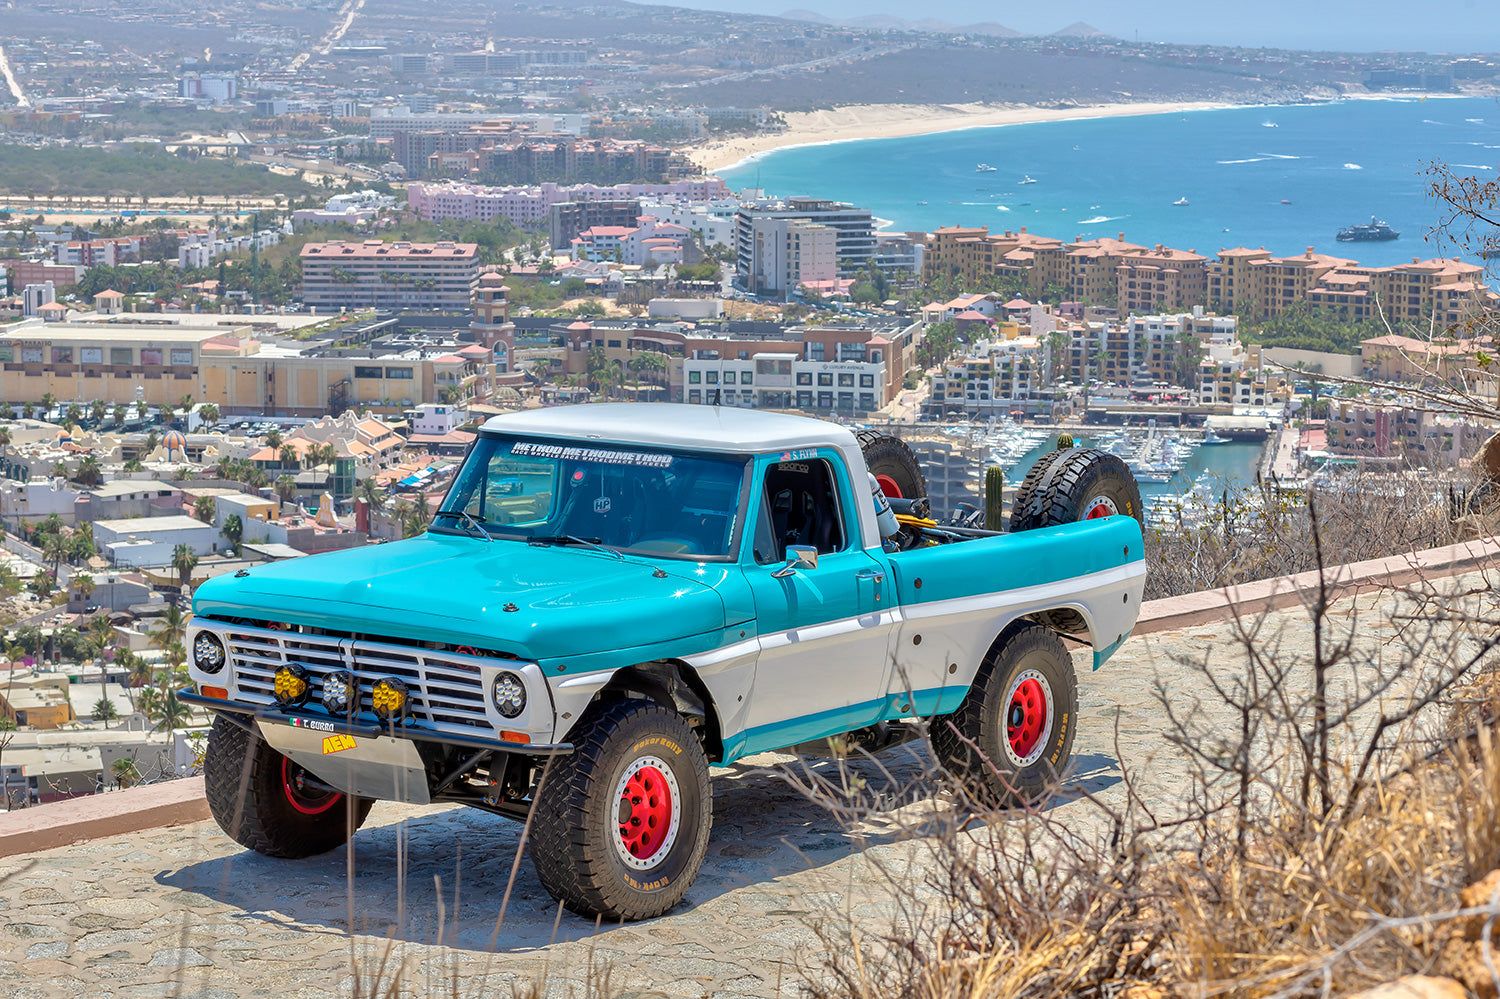 1969 Ford F100 Prerunner offroad race truck